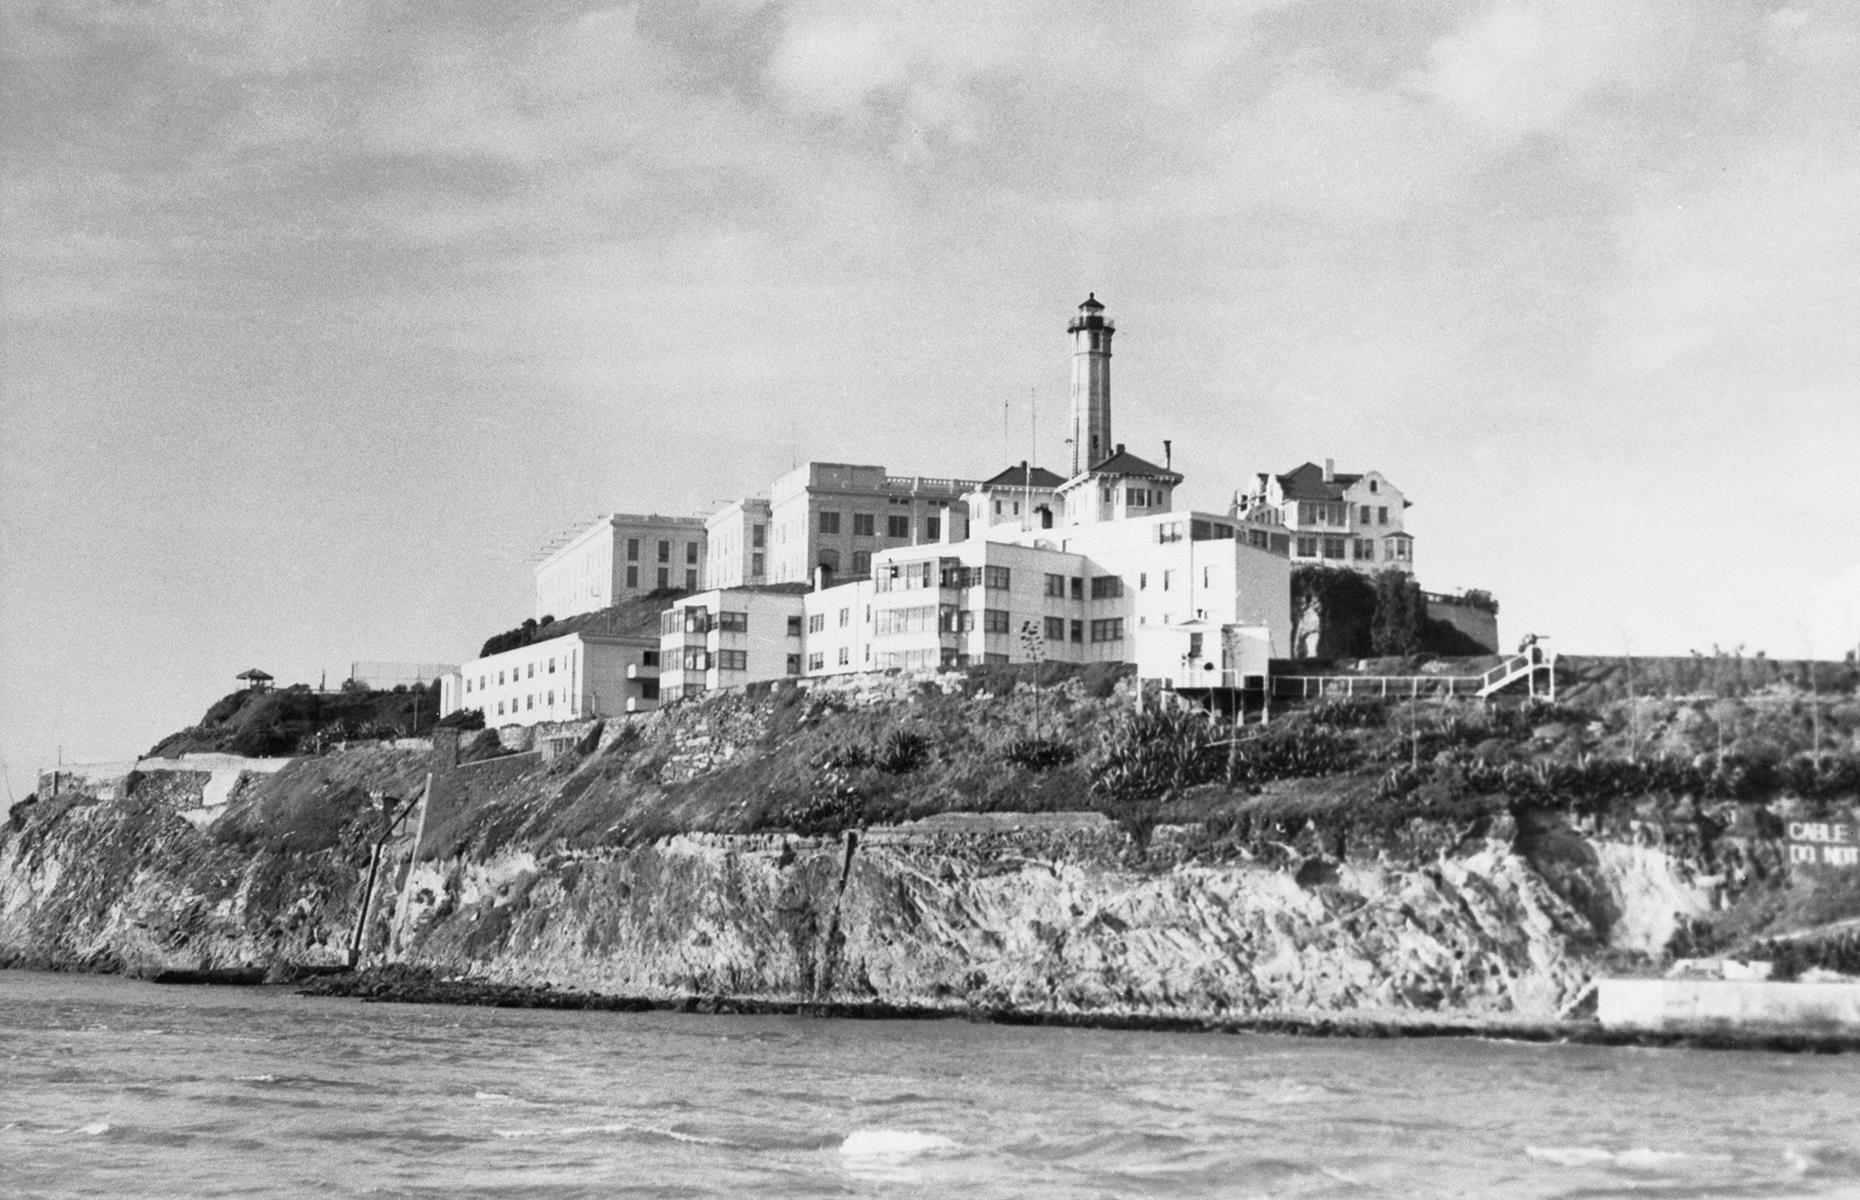 <p>As the decades pushed on, the fort's older weaponry – mounted cannons and antiquated rifles – became obsolete, and in 1907 Alcatraz was officially designated 'Pacific Branch, US Military Prison'. It was already a prison in all but name – the Spanish-American War in 1898 had seen its prison population expand from 25 to 461 – and was expanding rapidly. A giant new cellhouse with 600 individual cells, each with a toilet and electricity, was completed in 1912. At the time it was the largest reinforced concrete building in the world.</p>